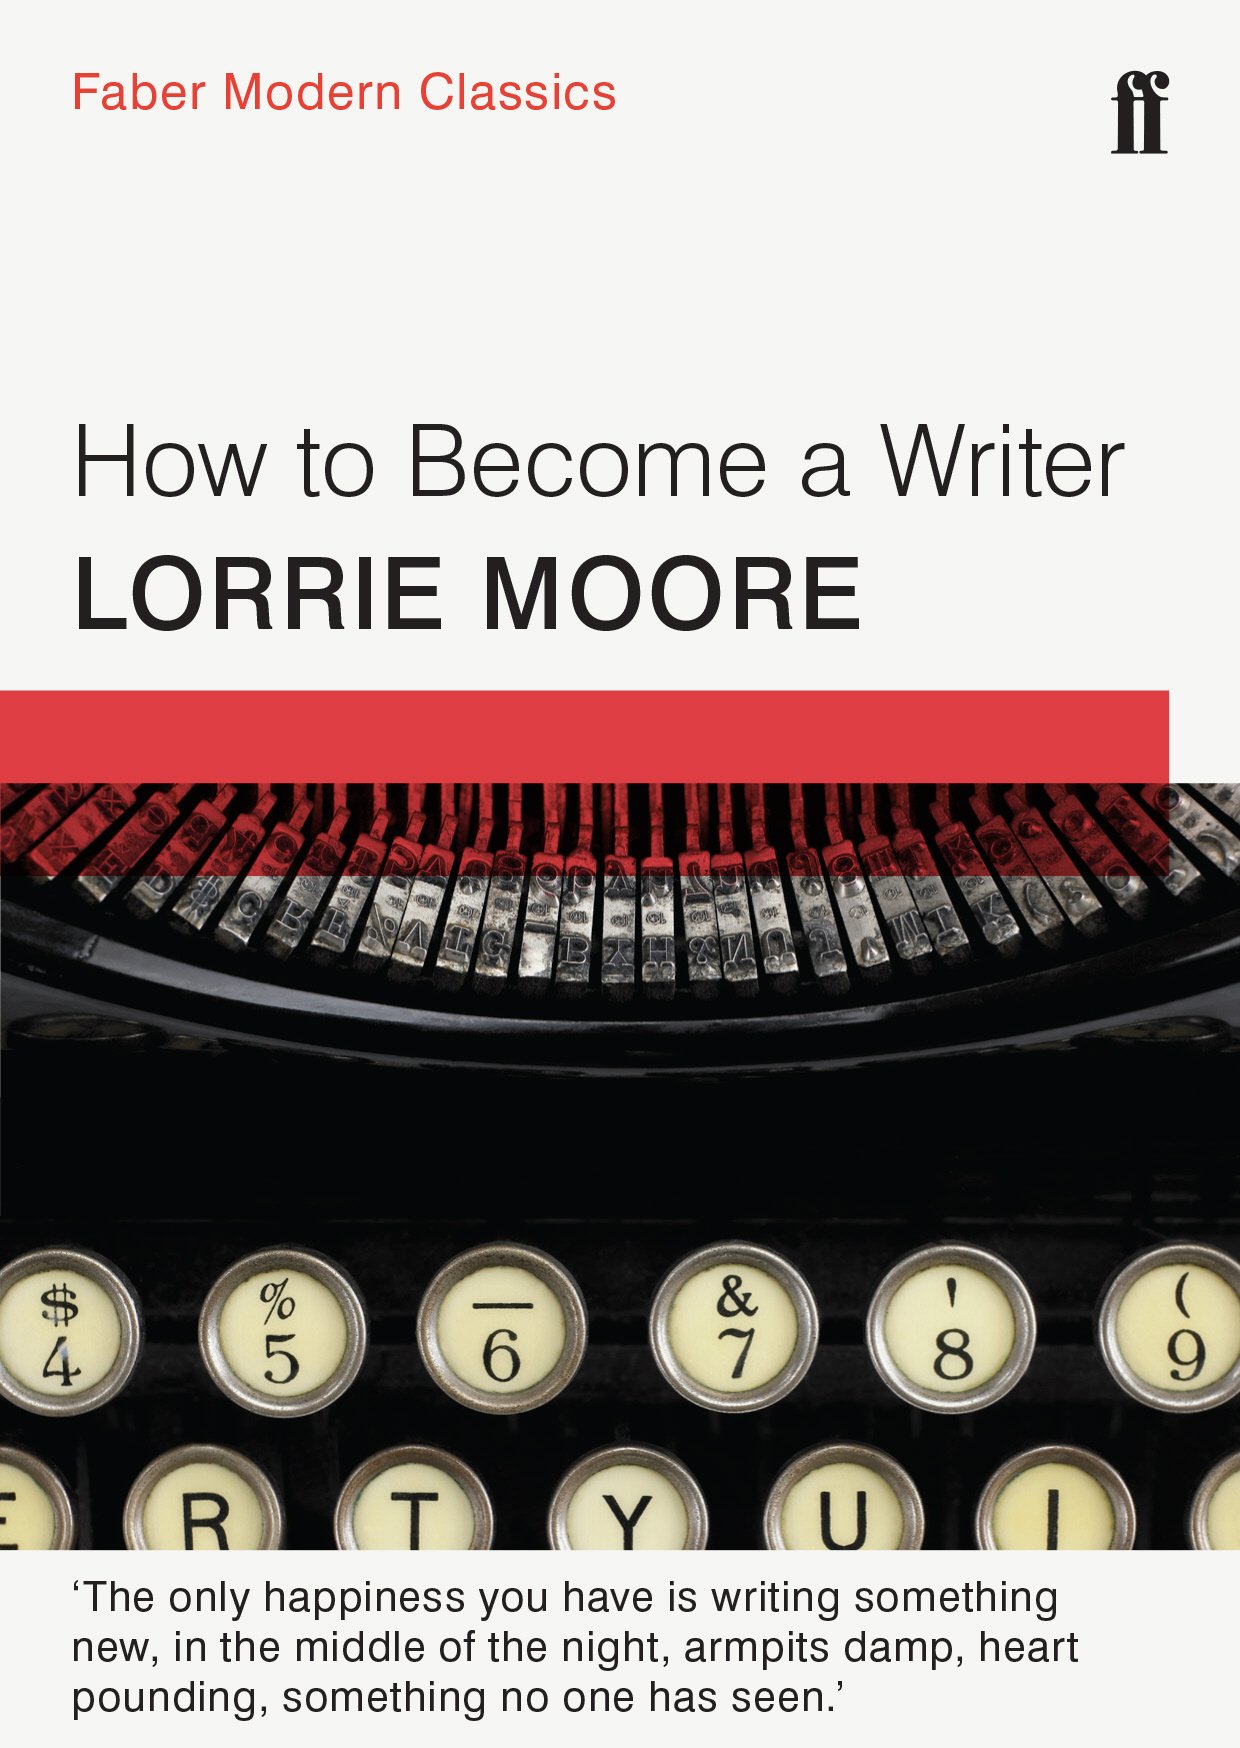 How To Become a Writer  Faber